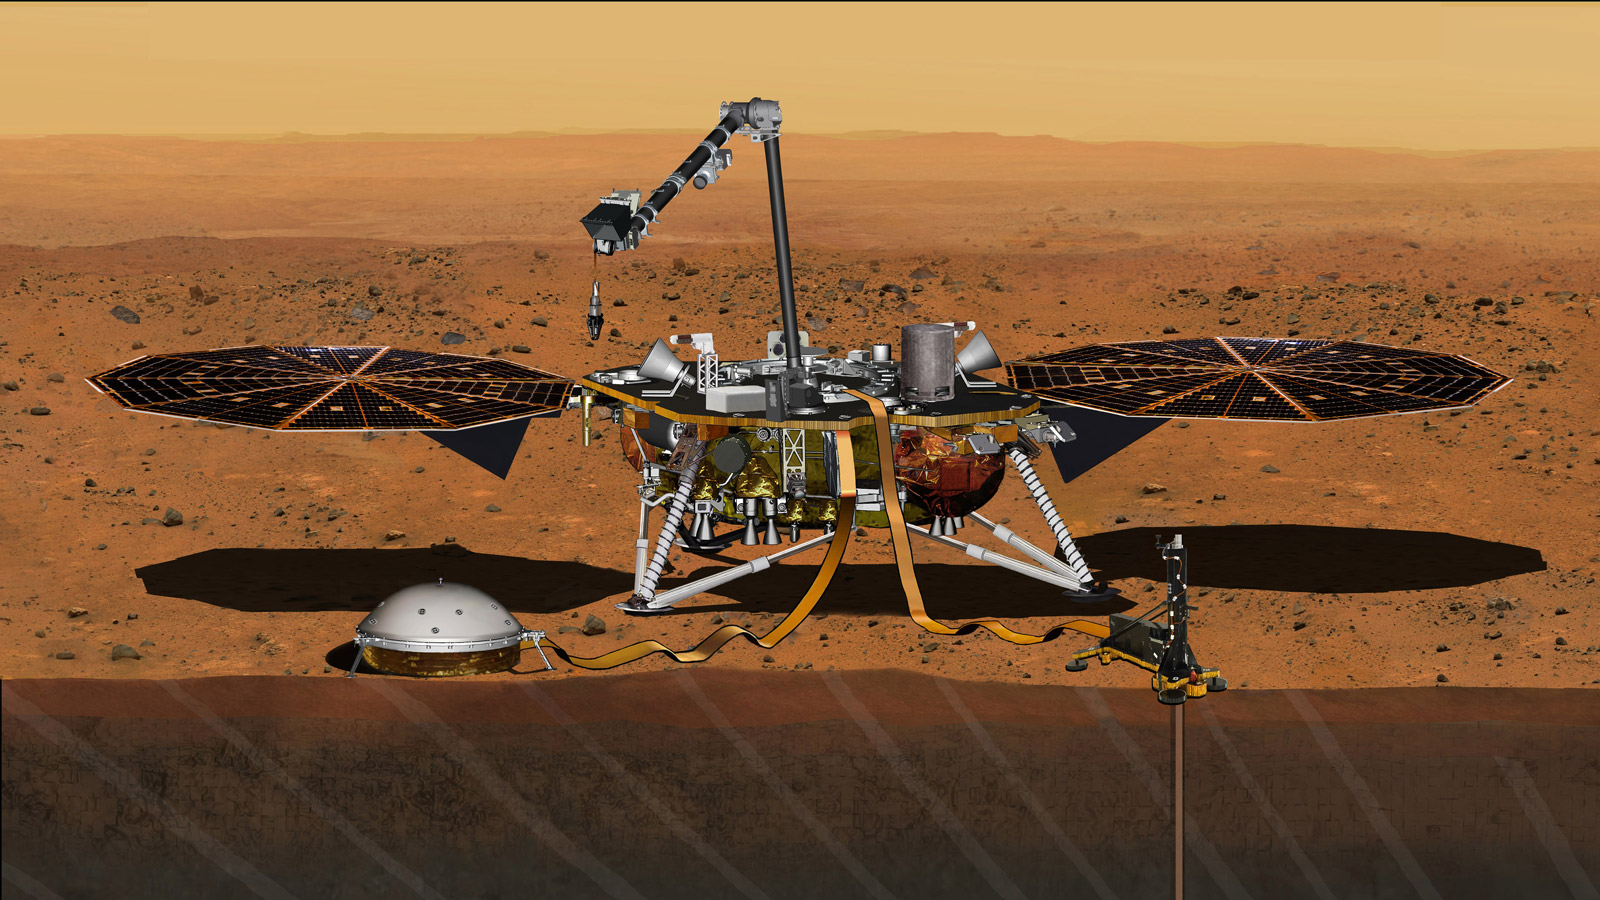 Artist's conception of InSight on the surface of Mars. Image Credit: NASA/JPL-Caltech